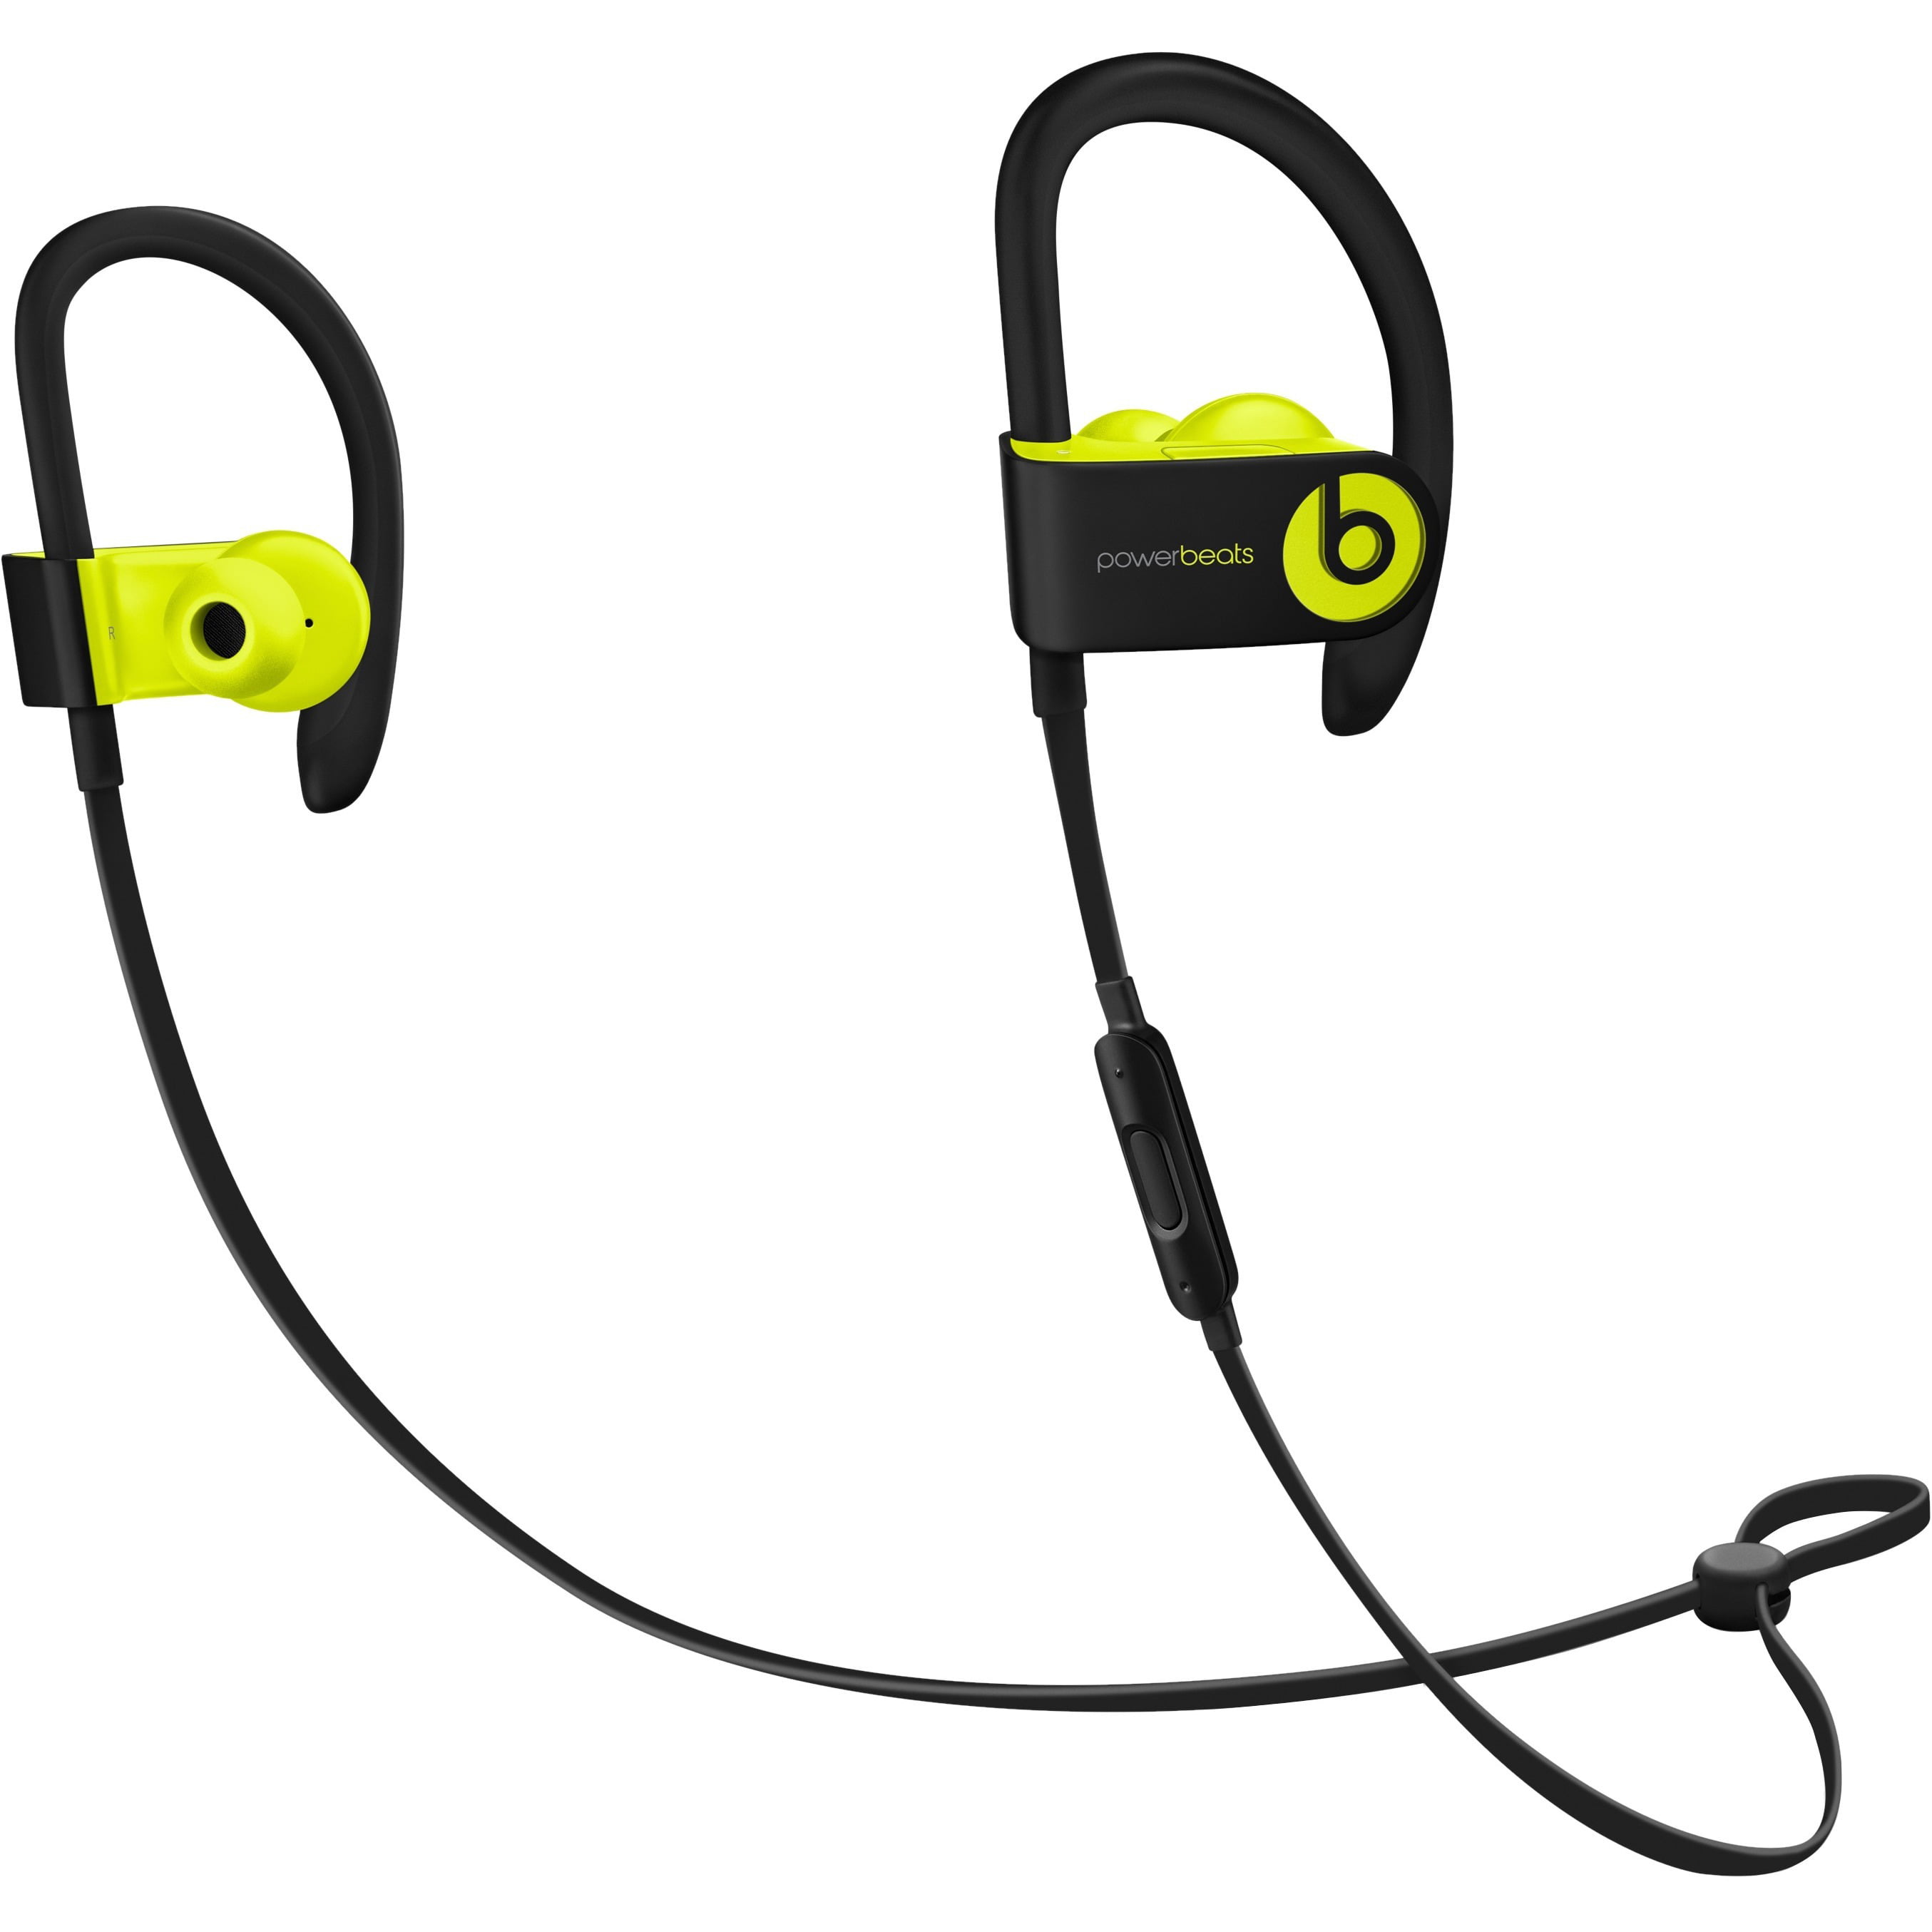 can i connect powerbeats3 to ps4